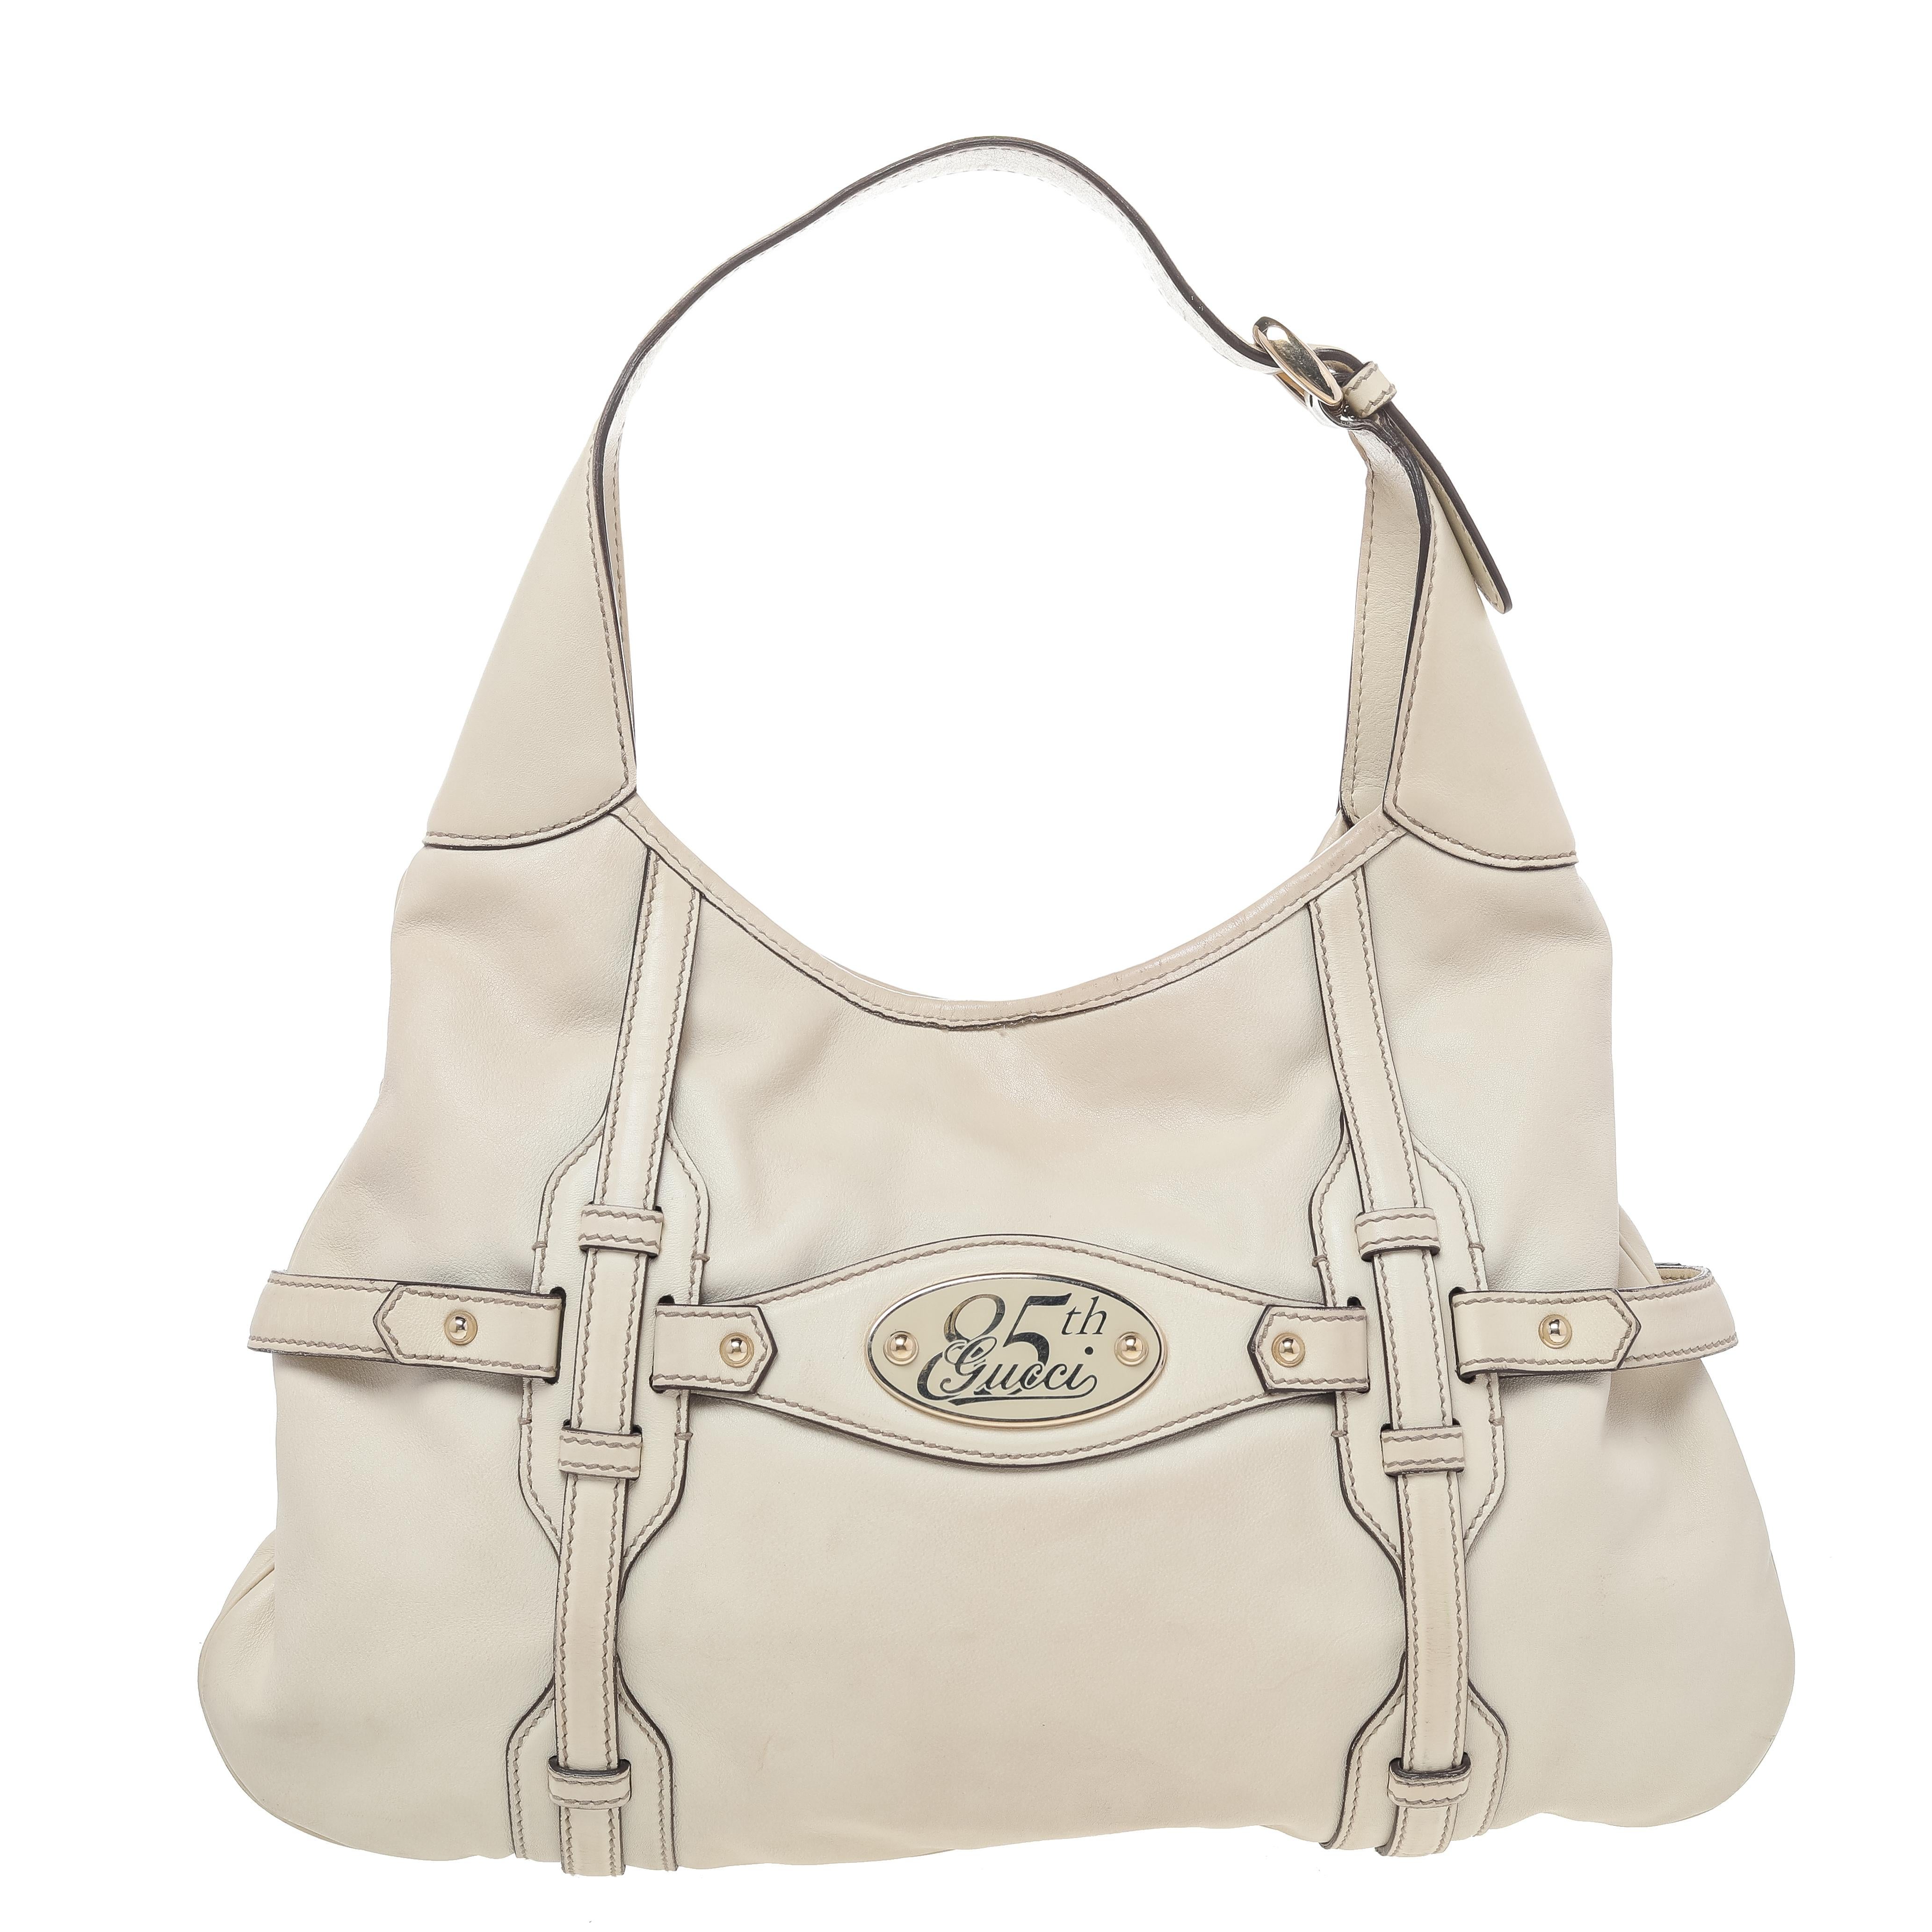 This Gucci 85th Anniversary Hobo is just what you need to add elegance to your appearance. The exterior is made from cream leather with matching gold-toned accents. This can be used as an everyday bag.